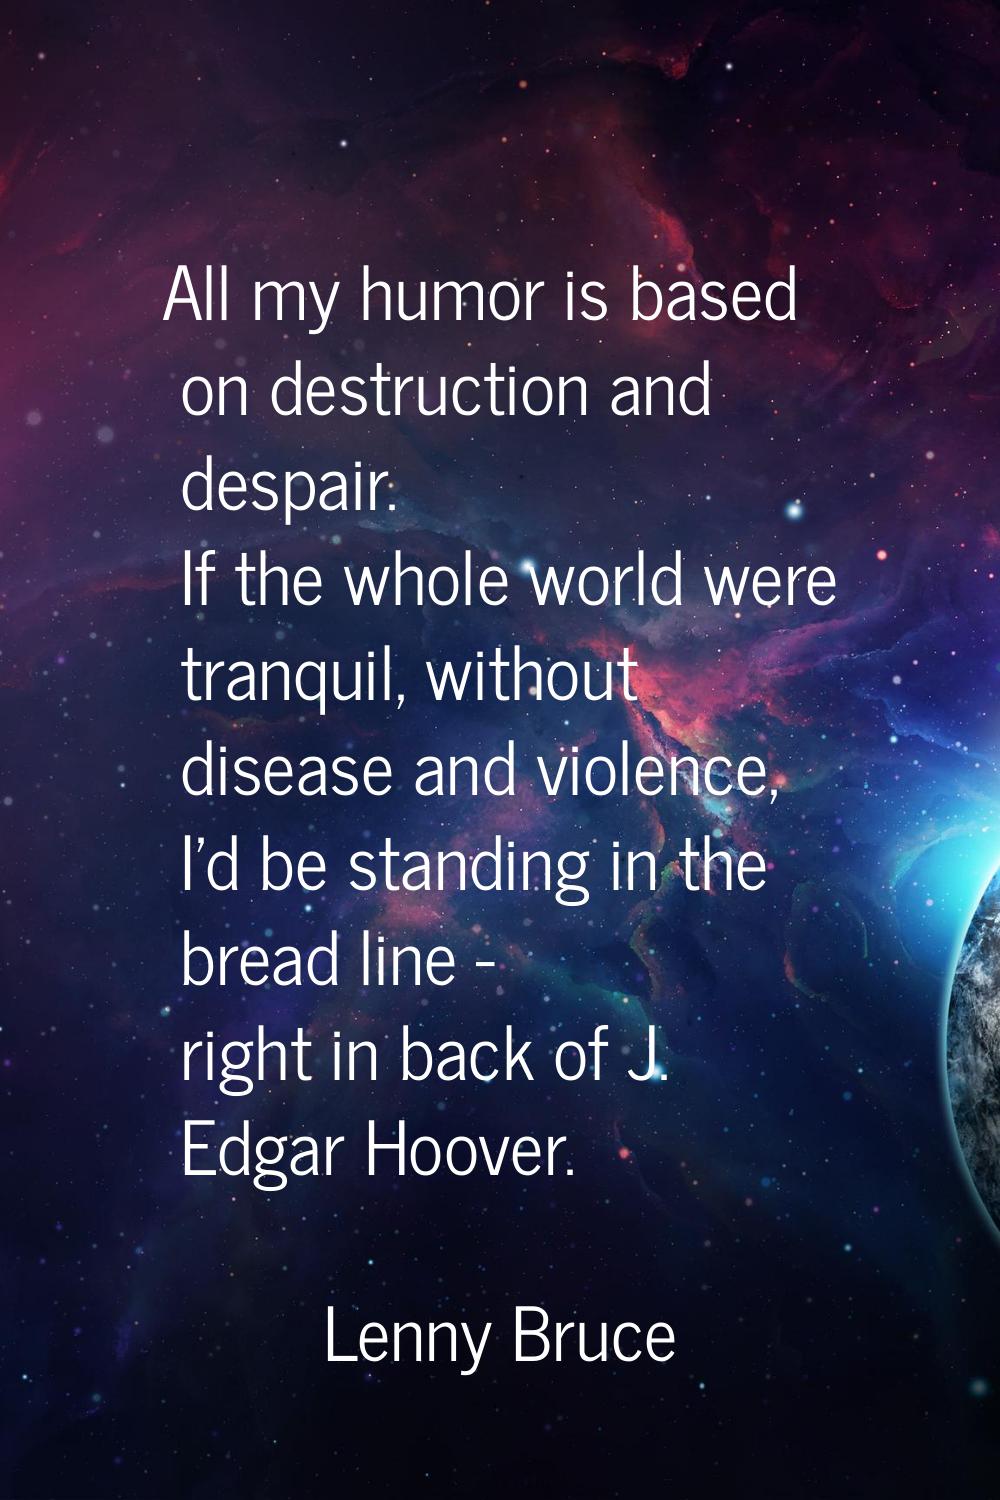 All my humor is based on destruction and despair. If the whole world were tranquil, without disease